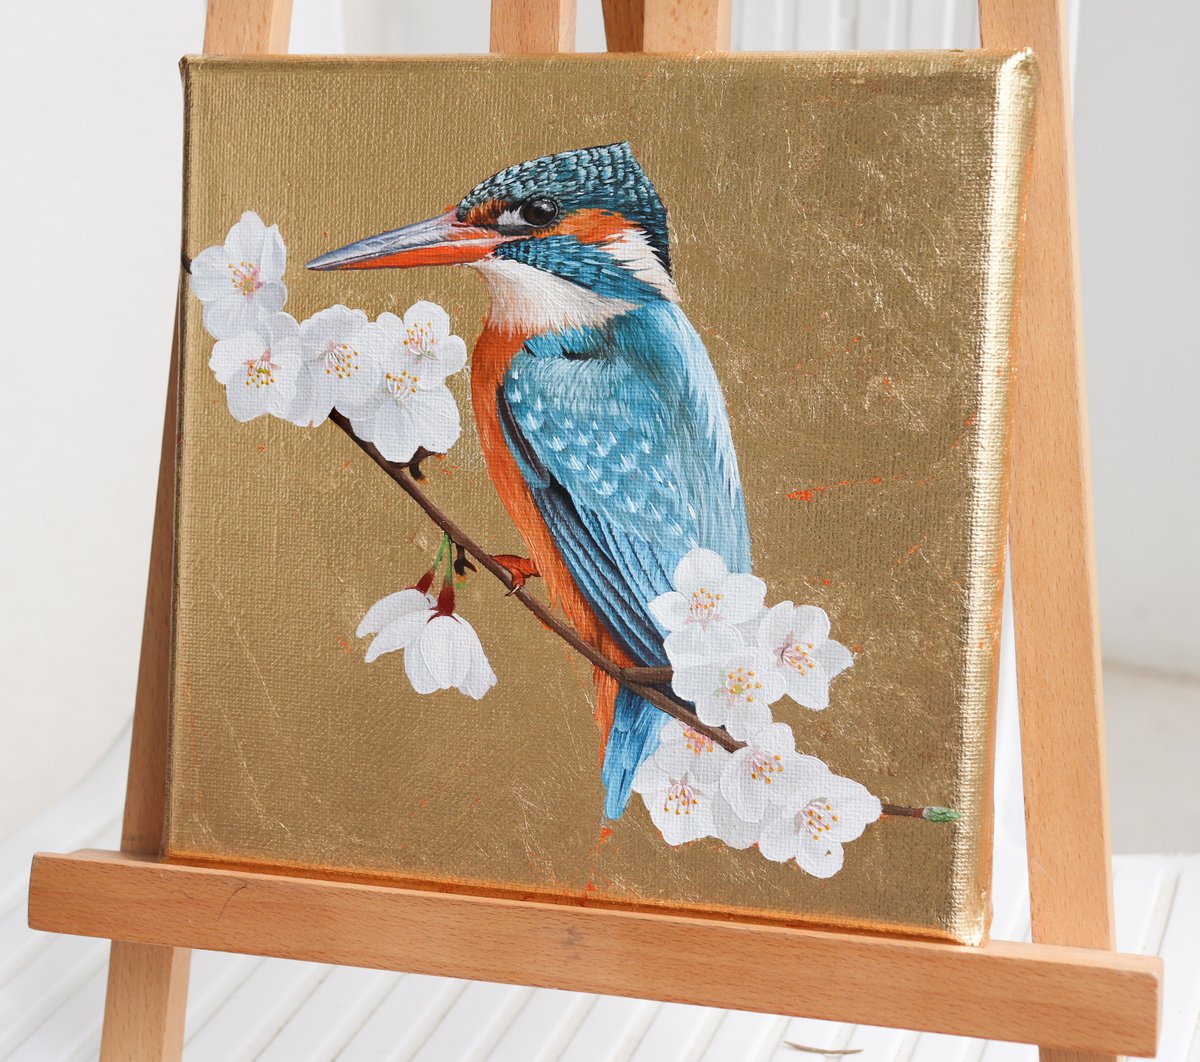 KINGFISHER by Milie Lairie